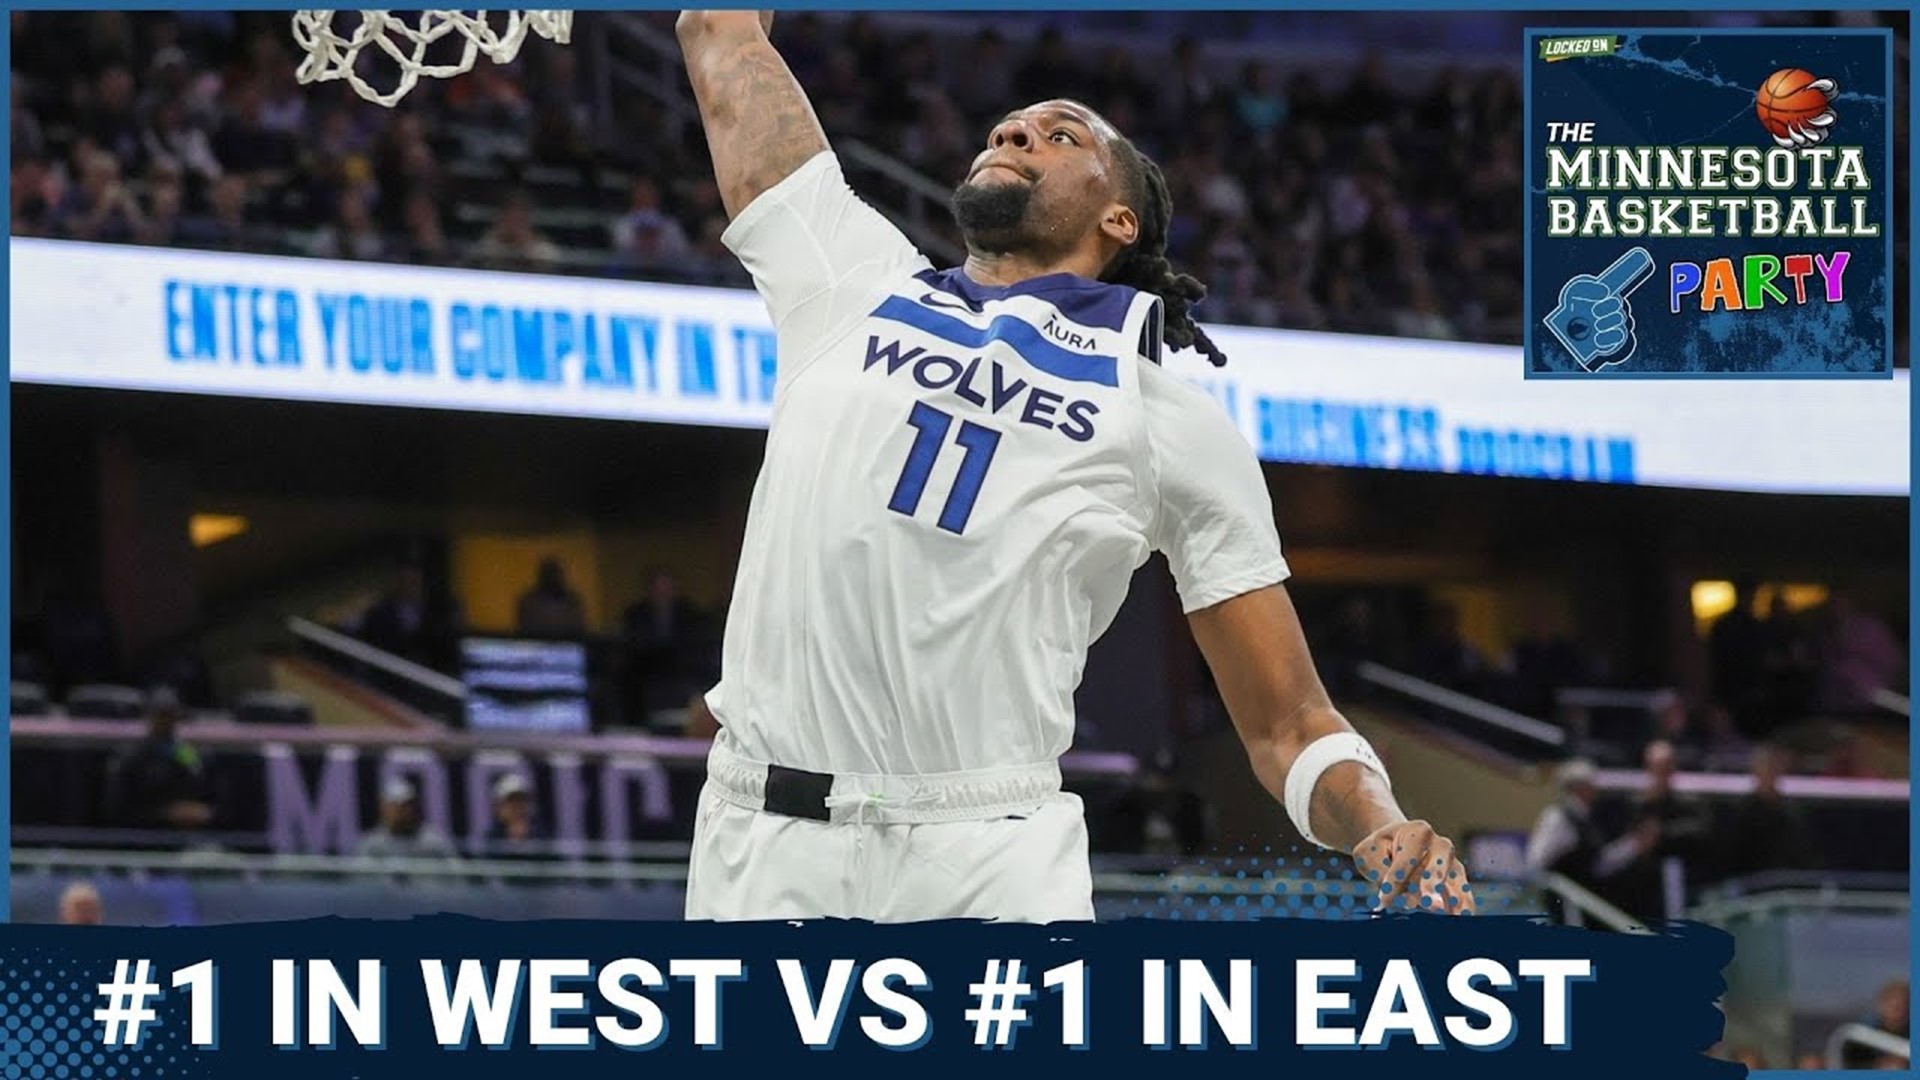 The Minnesota Timberwolves Are MAKING A STATEMENT in Schedule Gauntlet